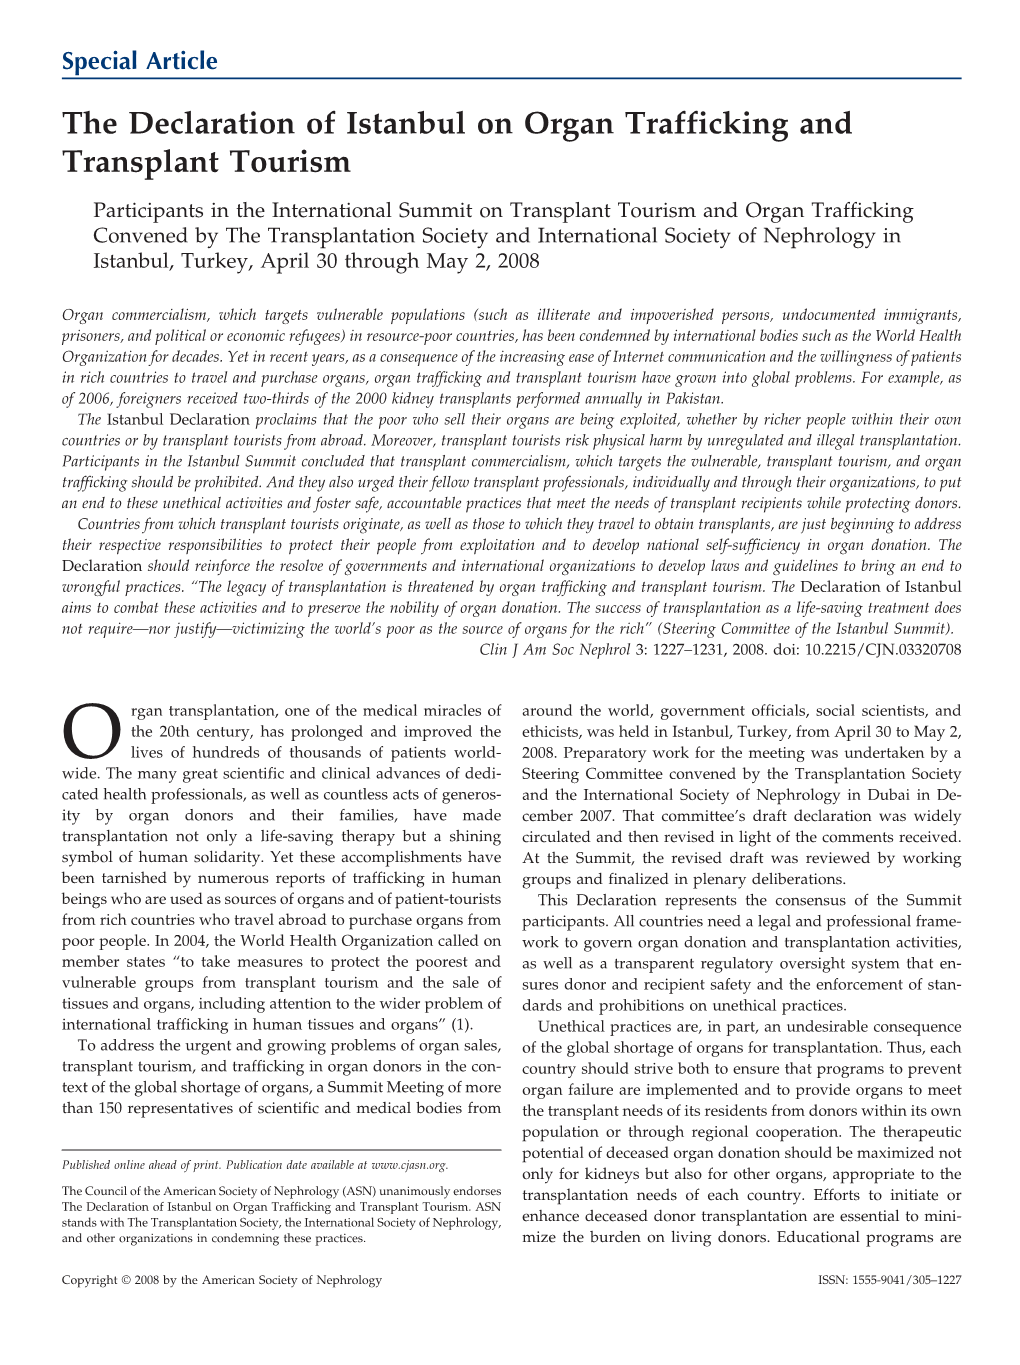 The Declaration of Istanbul on Organ Trafficking and Transplant Tourism